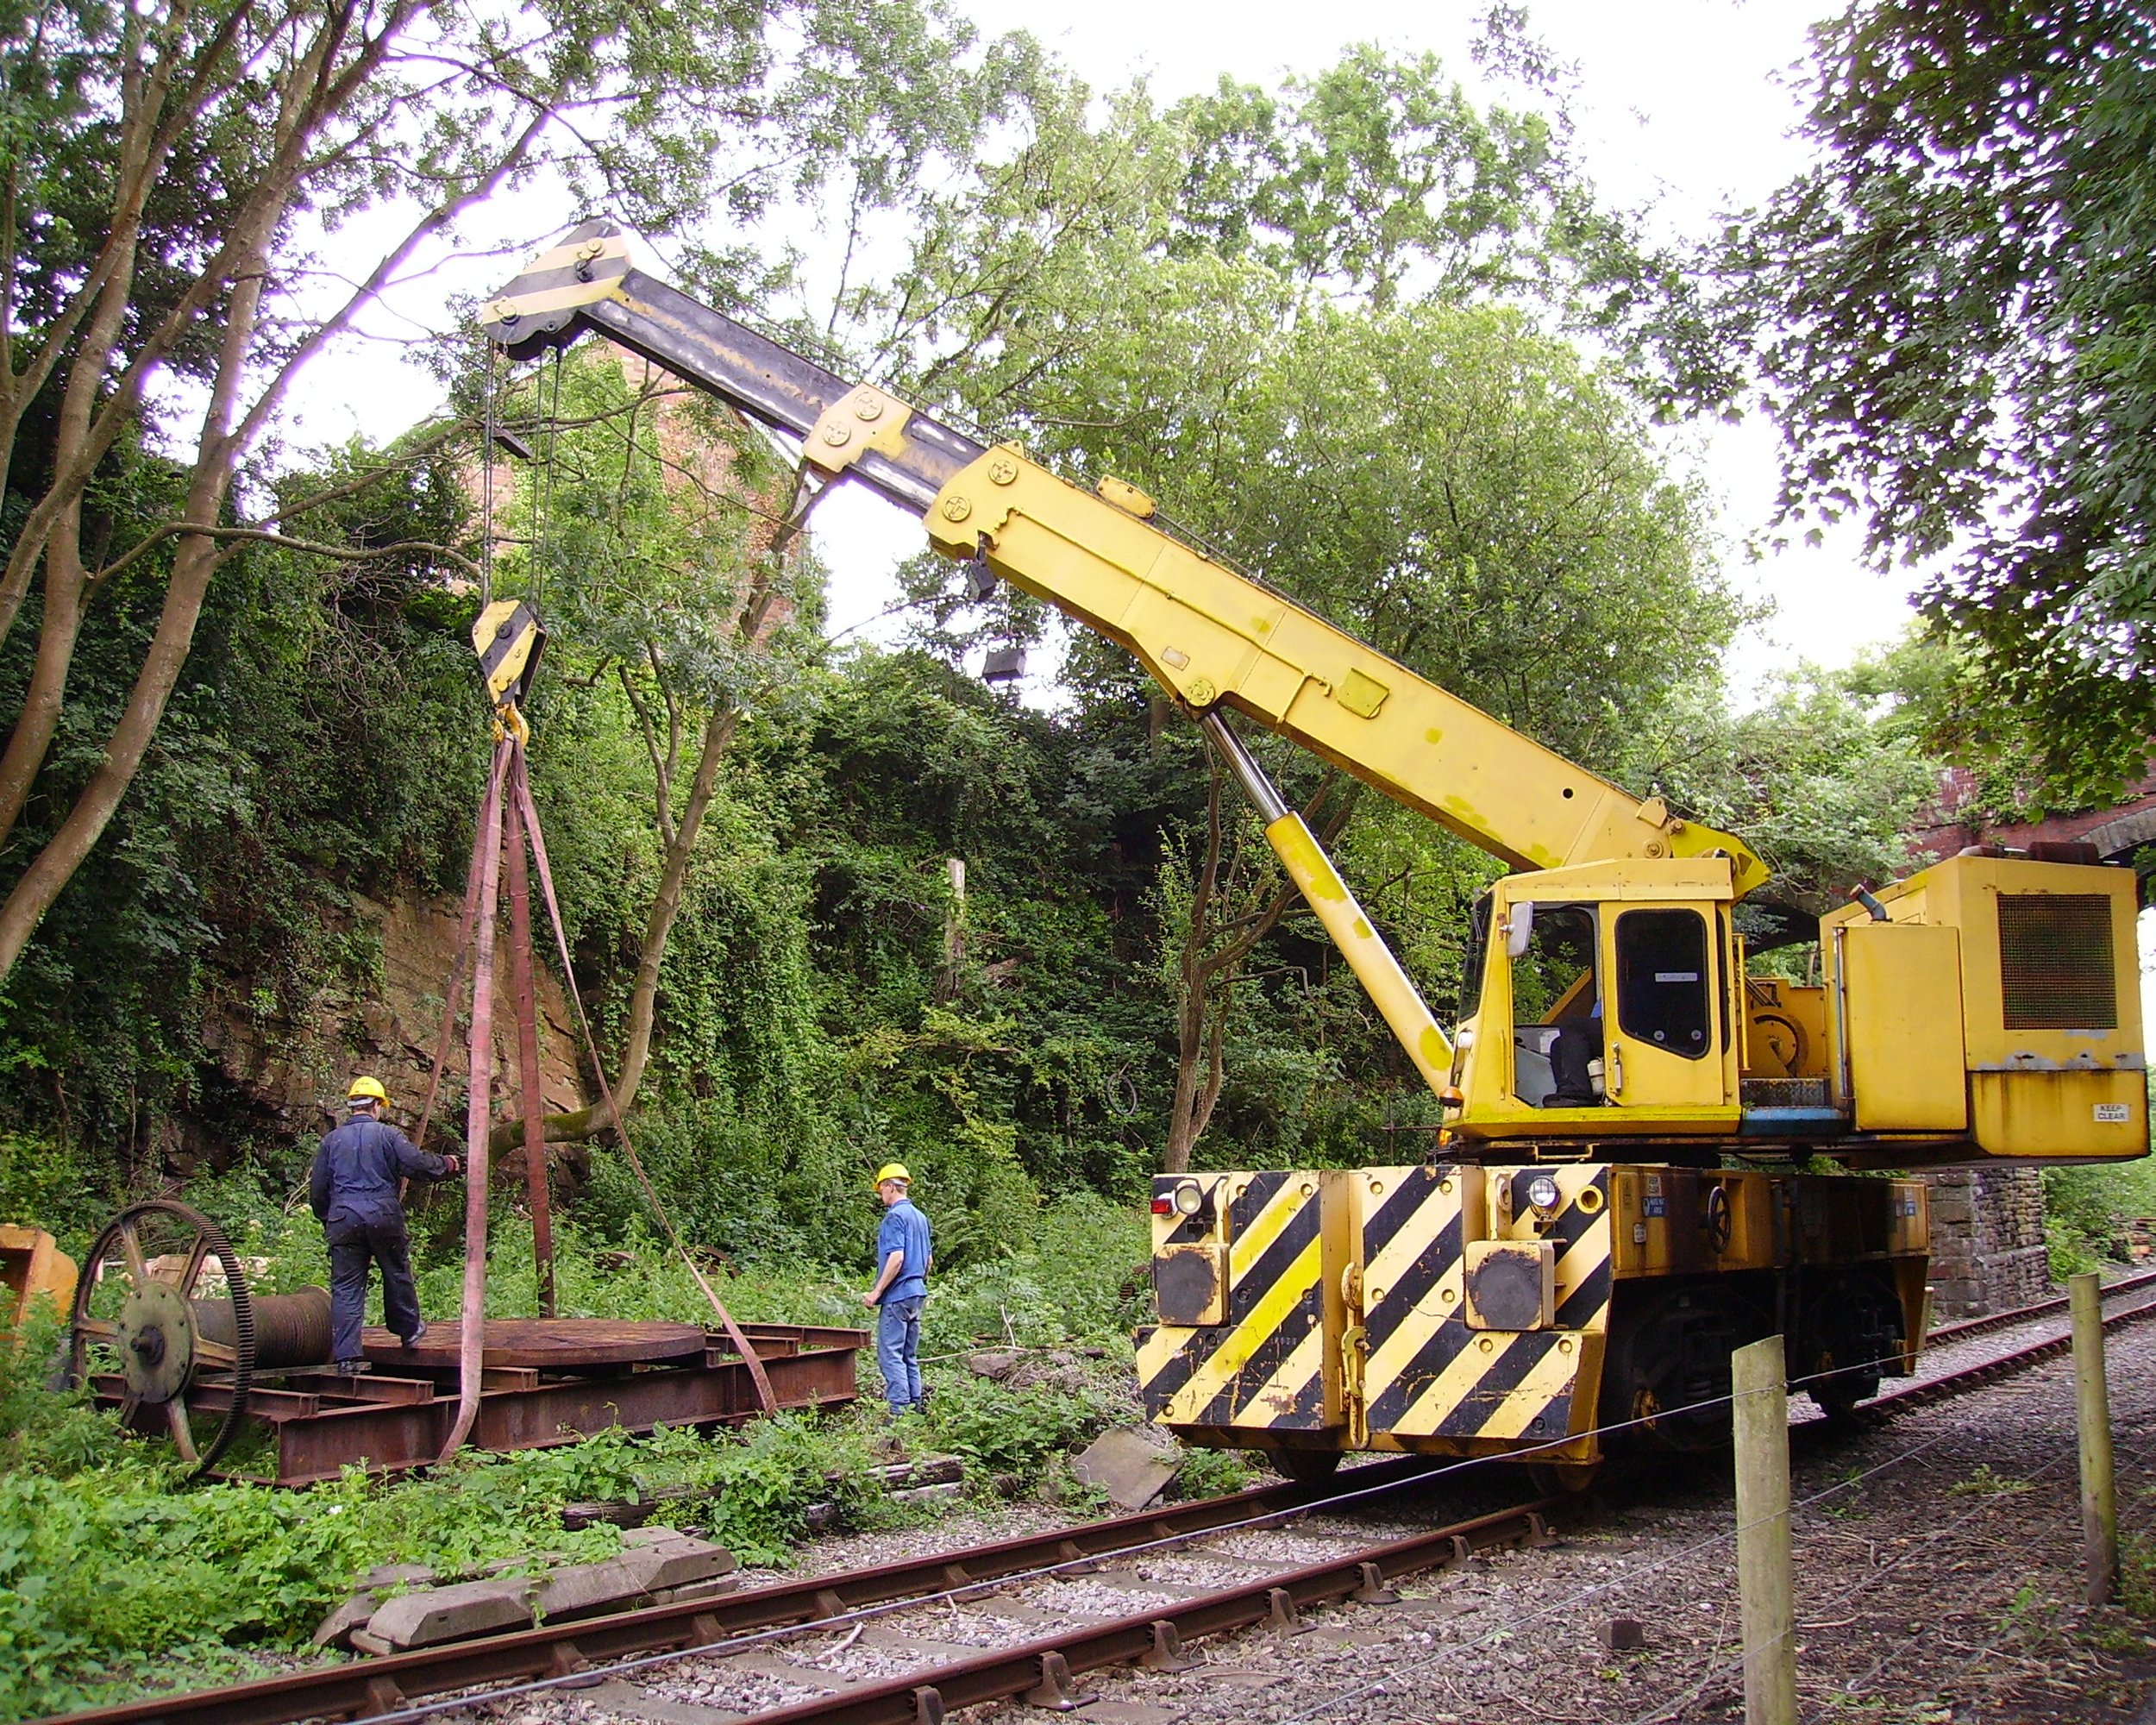 The crane in action in Cherry Gardens Cutting on 2nd July 2007.